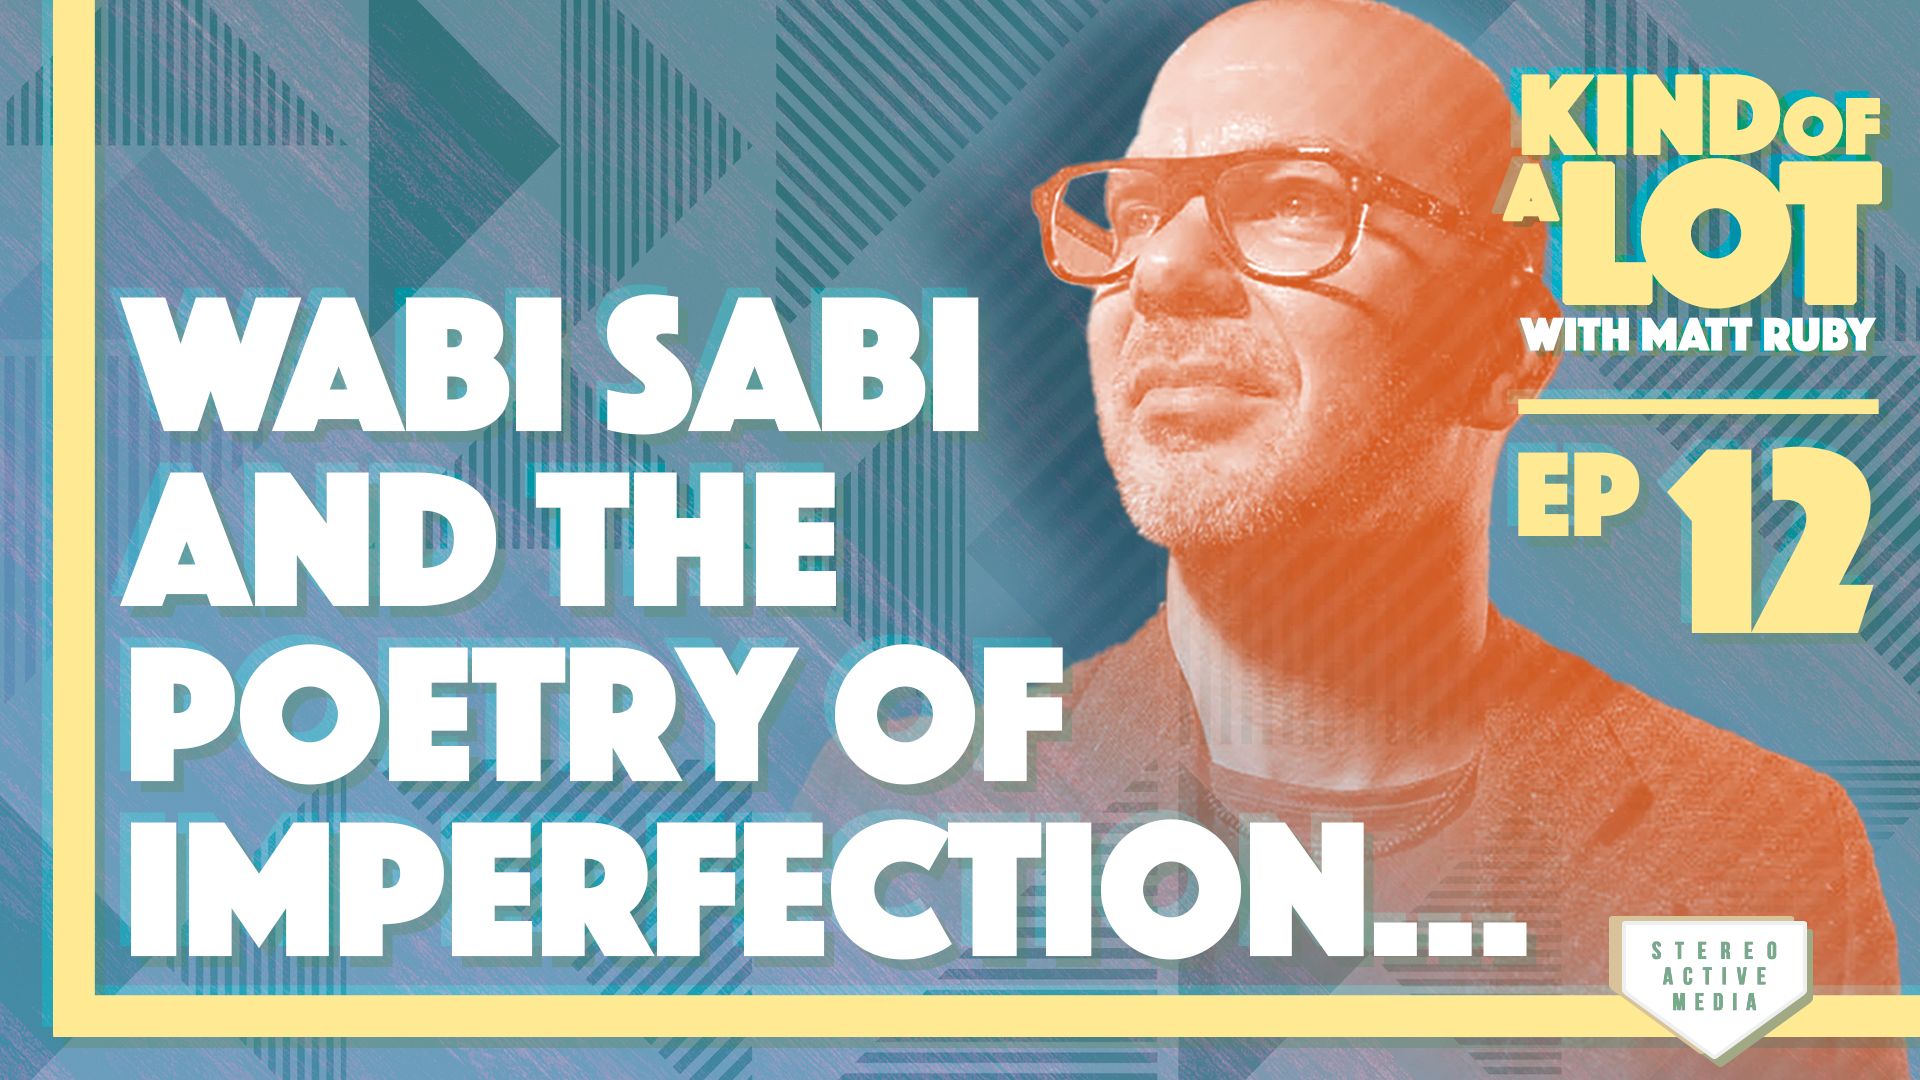 Ep 12 // Wabi Sabi and the poetry of imperfection…